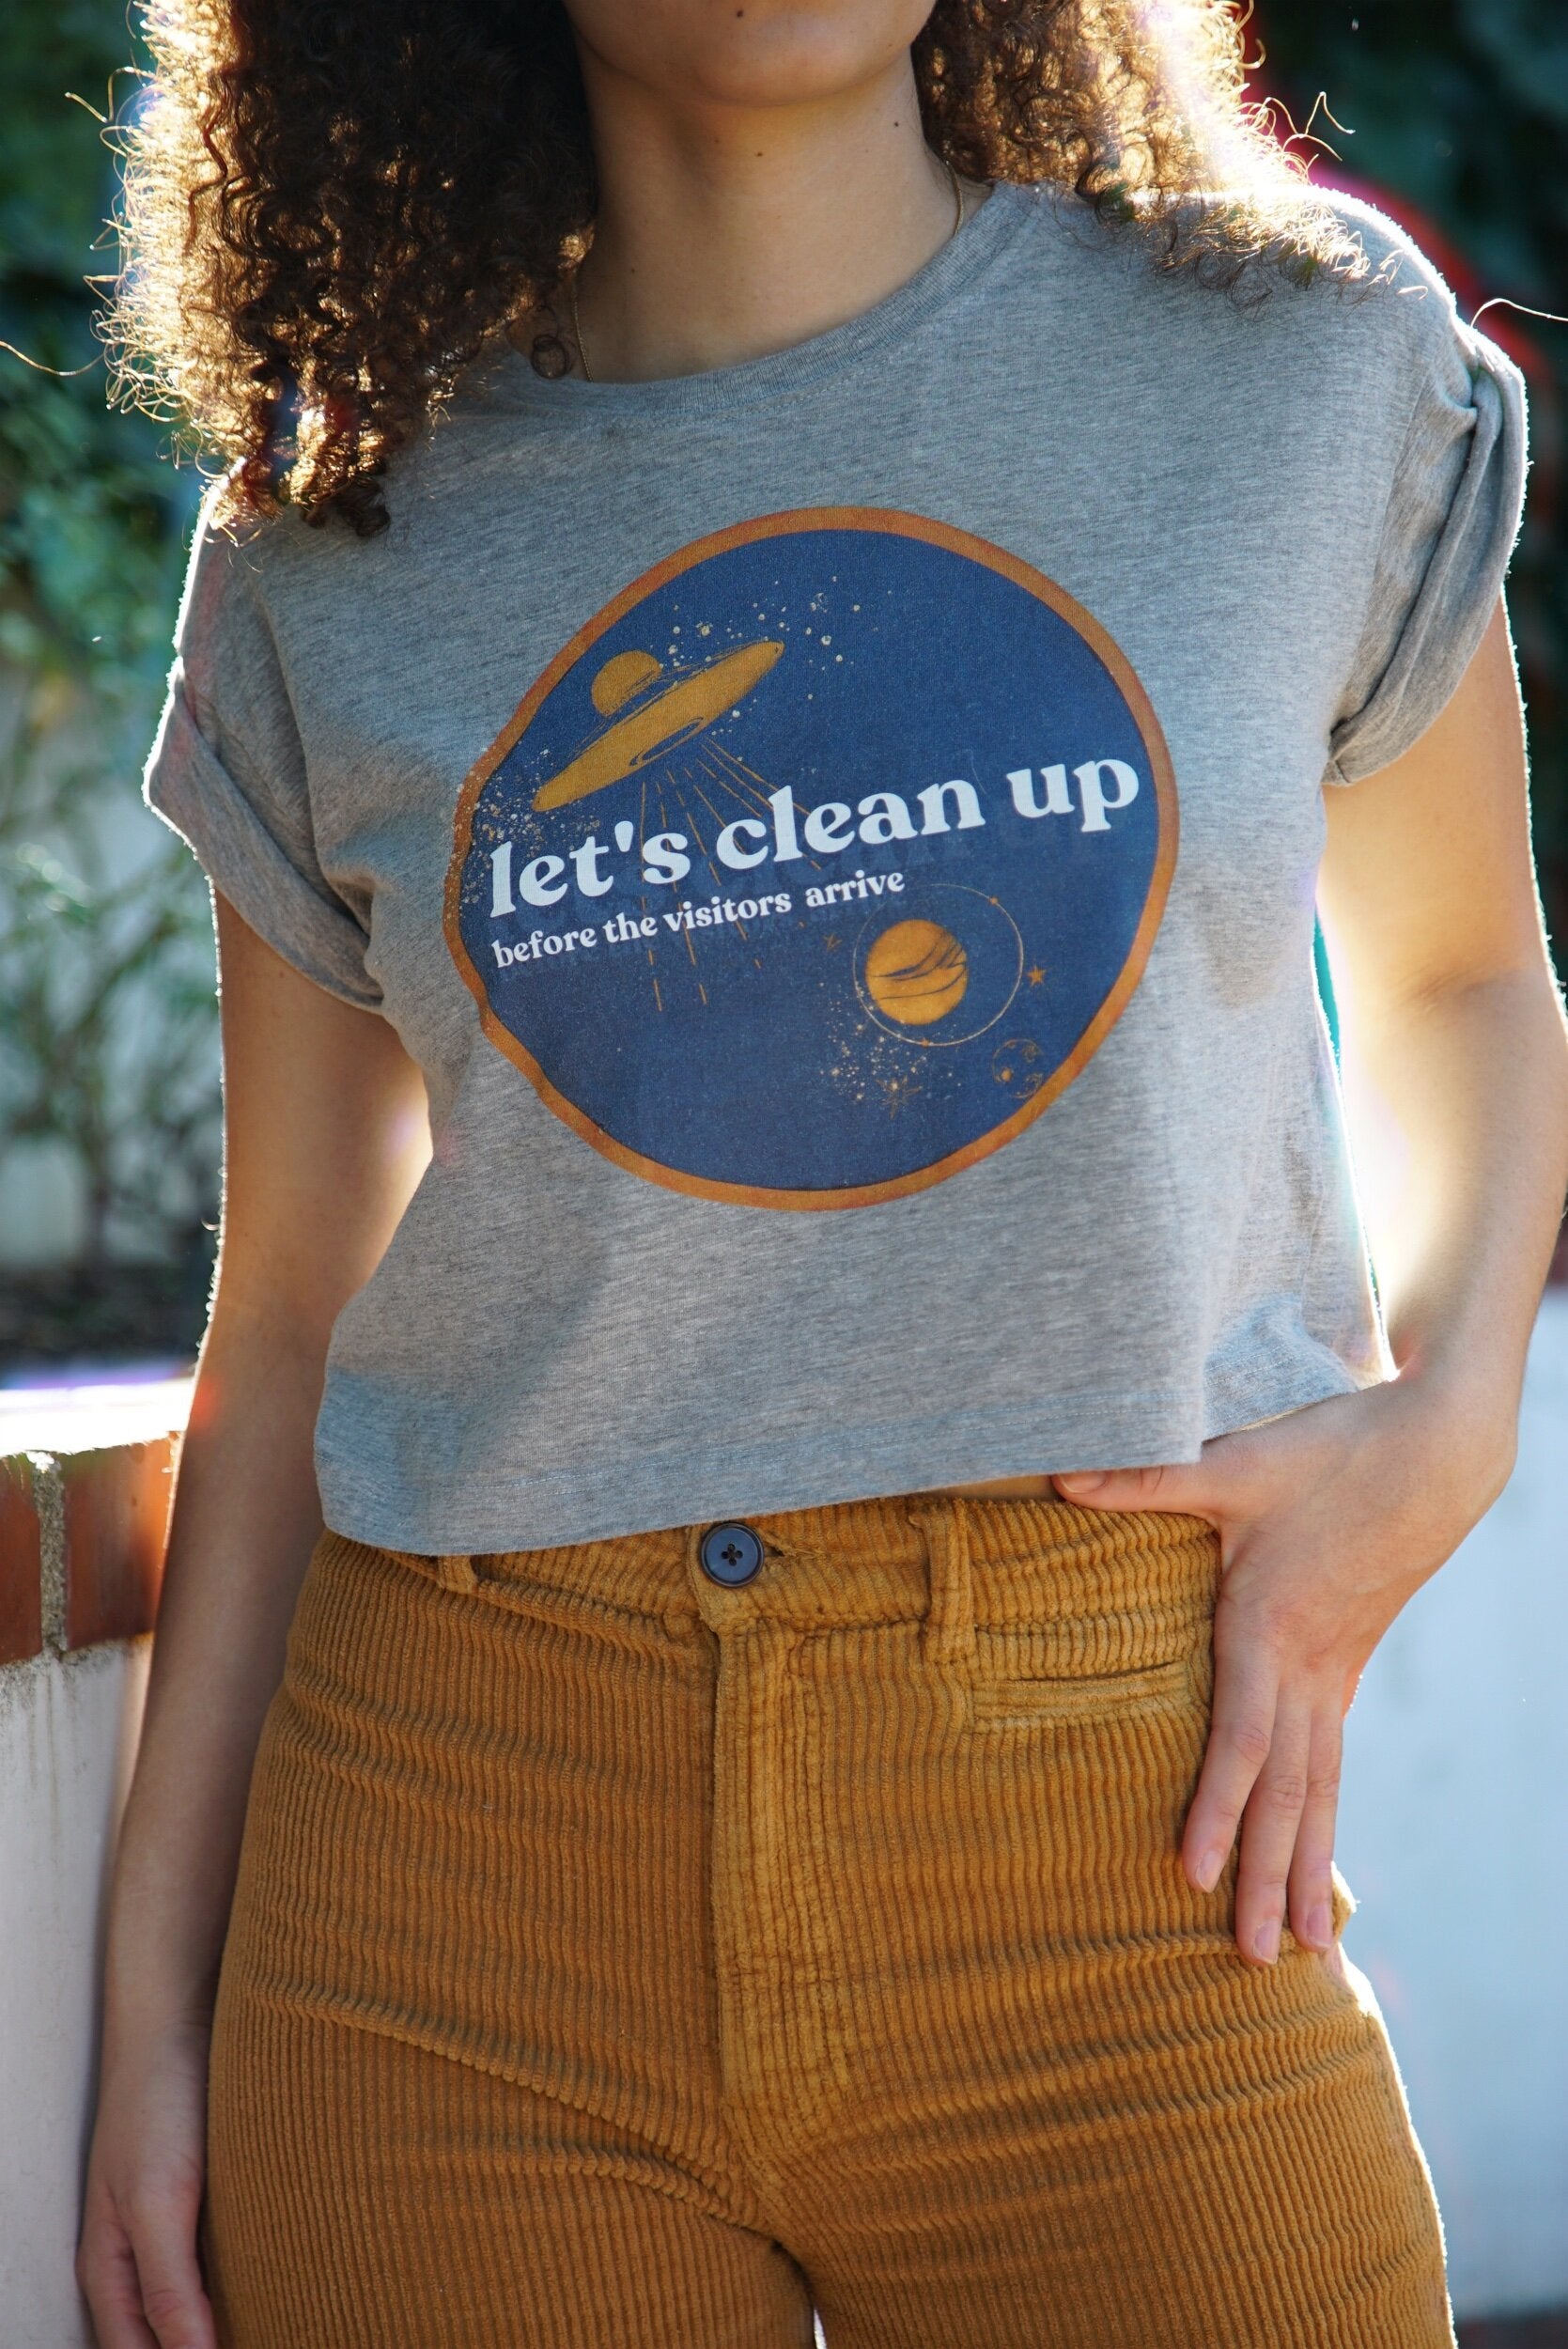 Lets clean up, Tees Organic cotton clothes for women, Organic Cotton Clothing for Women, Organic Cotton Tank Tops, Cotton Organic T Shirts, Organic Cotton T Shirt, Band Tees, Vintage Tees, Rolling Stones Bomber Jacket, Stoned Girls, She's a rainbow, Environmental Slogan Tshirt, Sustainable Fashion Ideas, Sustainable Fashion Dresses, What is sustainability in fashion, Teen sustainable fashion and ethical brands, Sustainable Fashion Course, made to order clothing, made to order shirts,